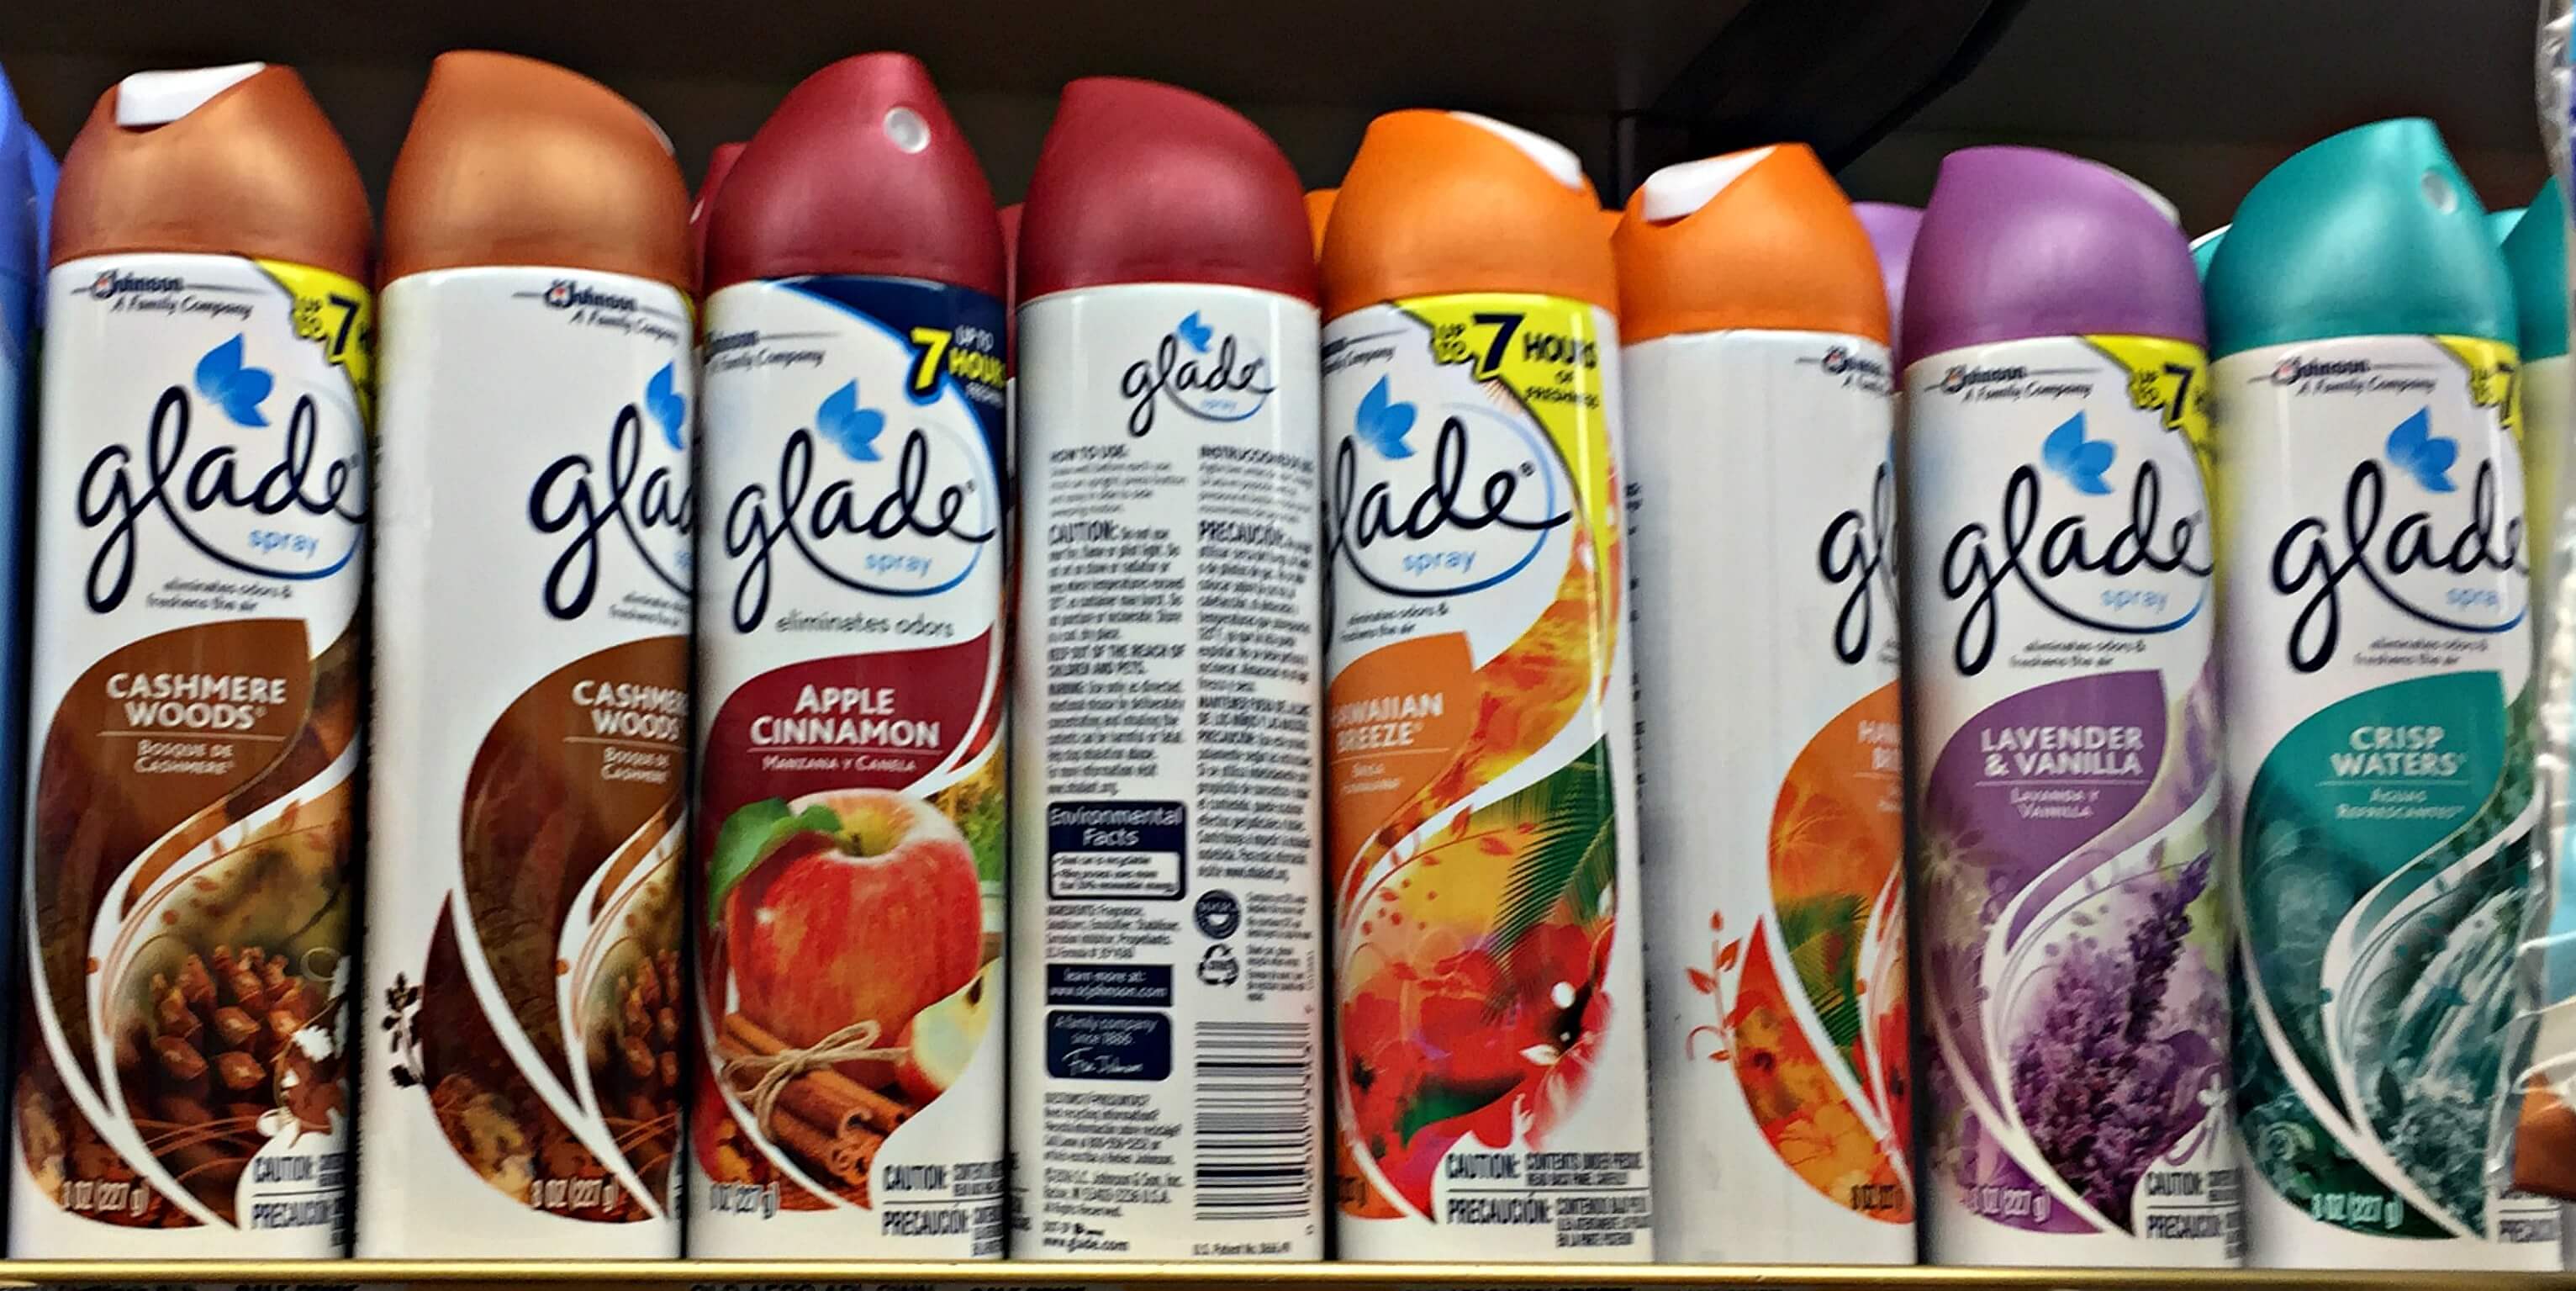 new-coupon-glade-aerosols-or-solid-air-fresheners-just-0-12-at-rite